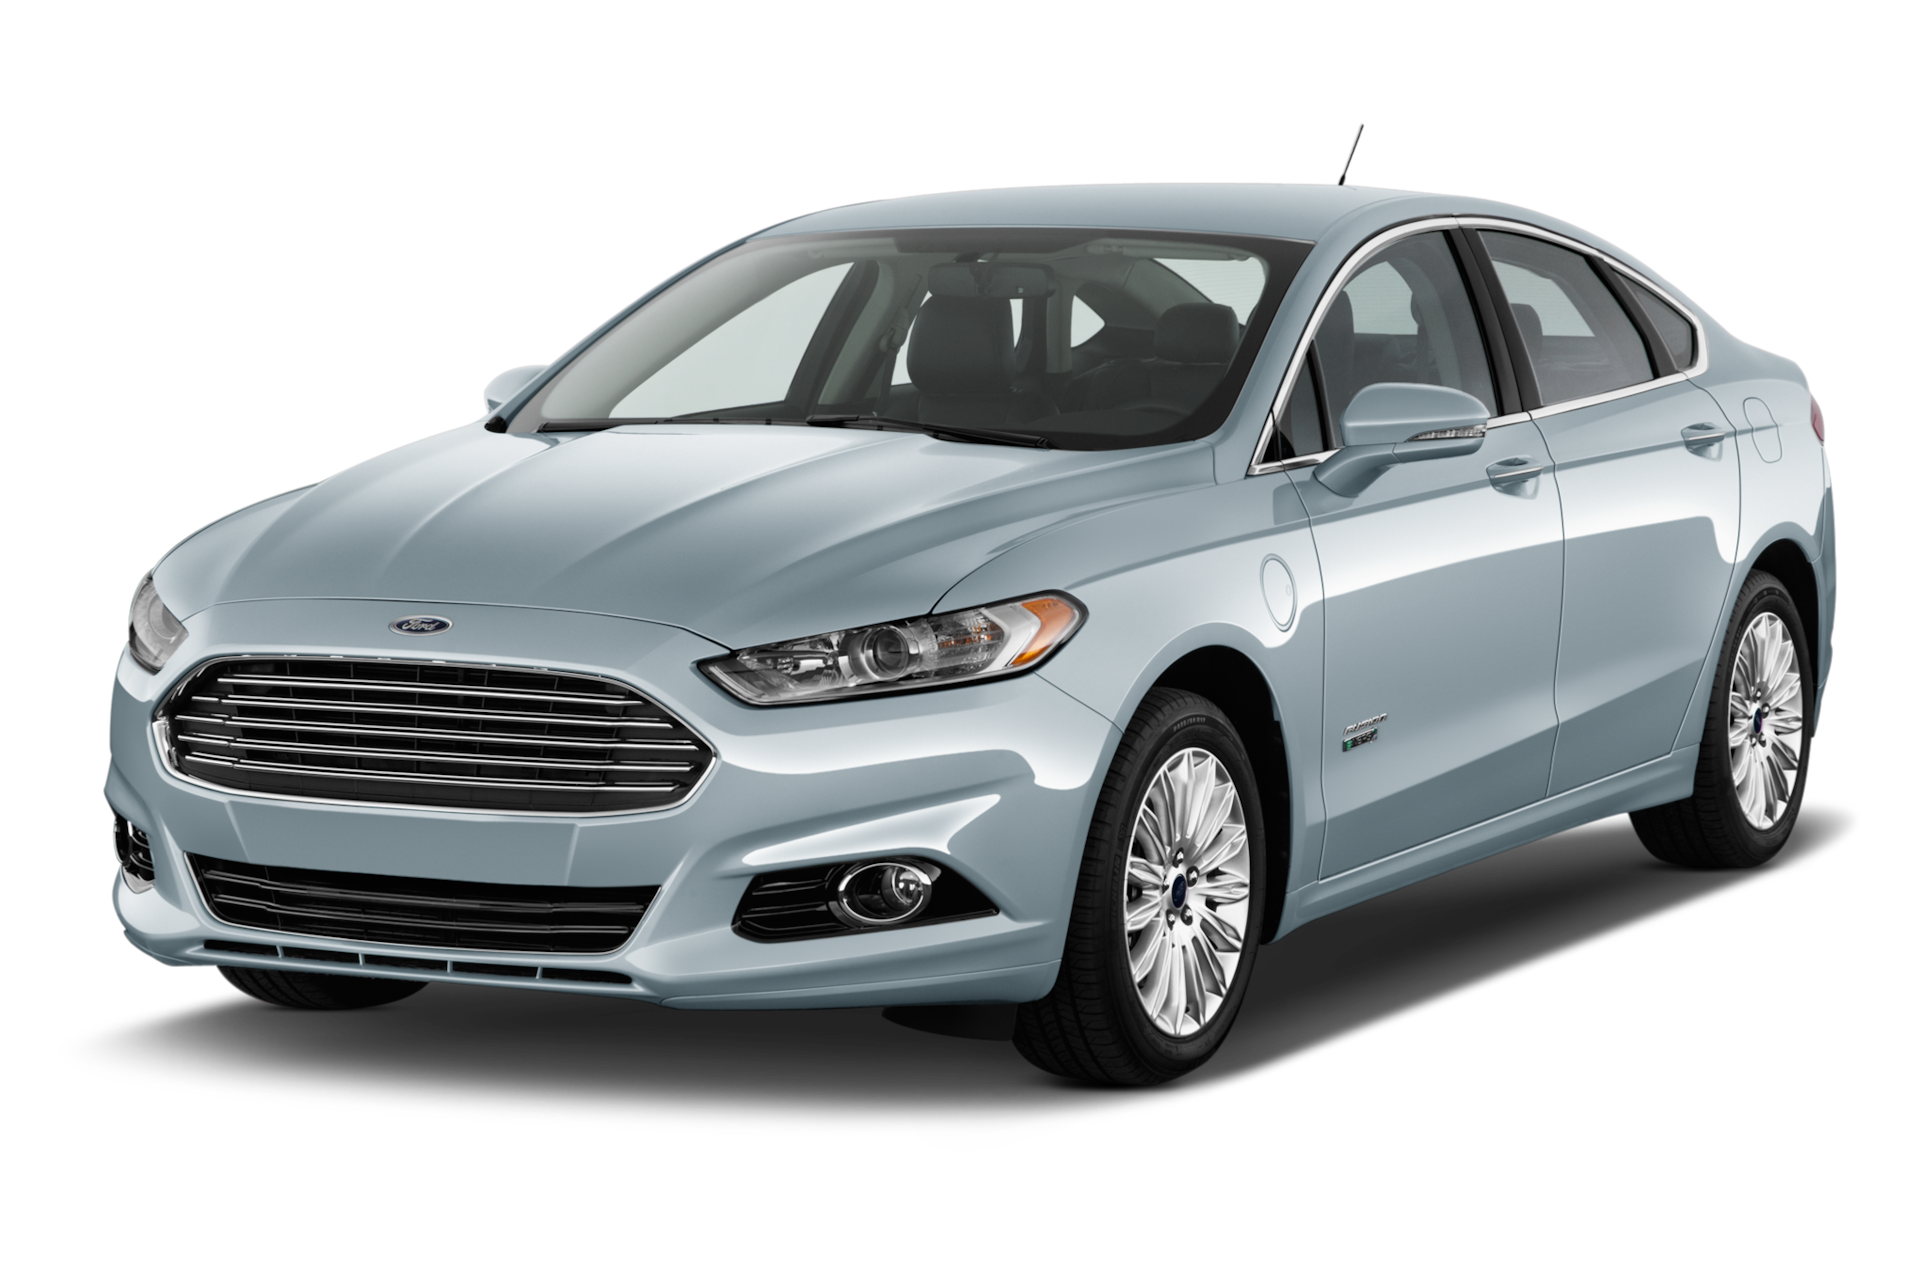 2015 Ford Fusion Energi Prices, Reviews, and Photos - MotorTrend